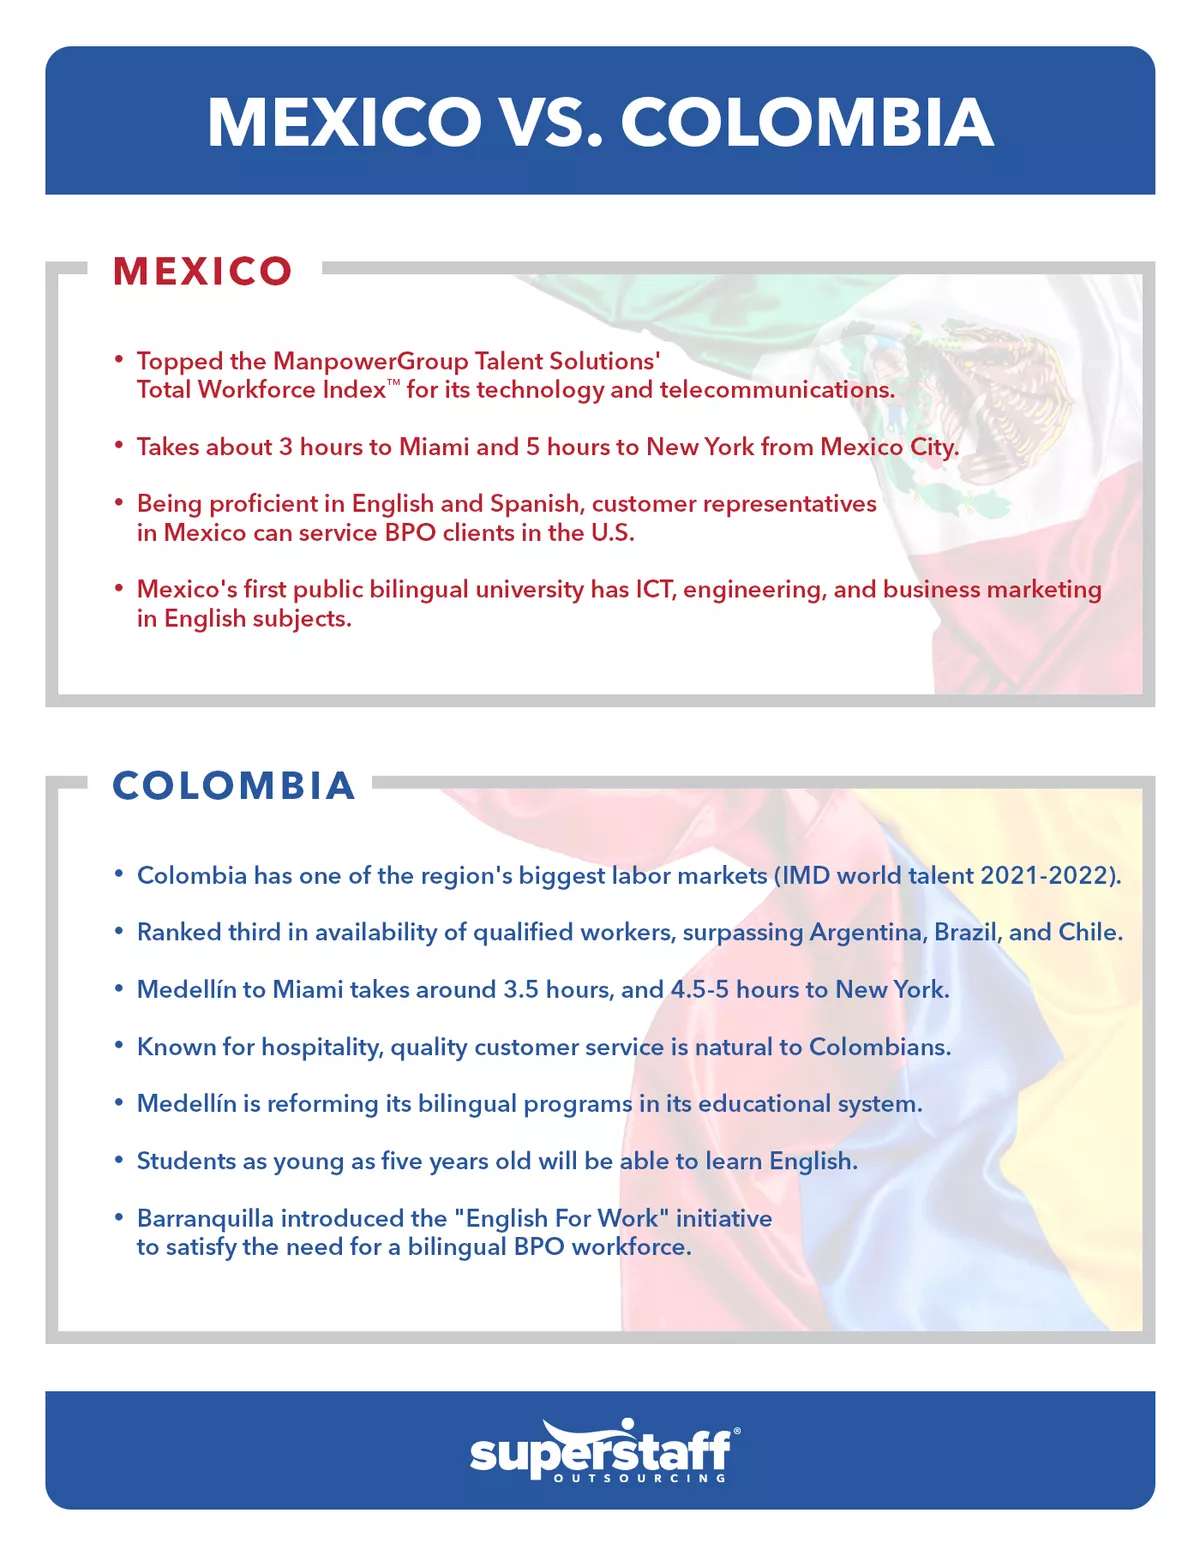 An infographic compares Nearshore technology outsourcing between Colombia and Mexico.